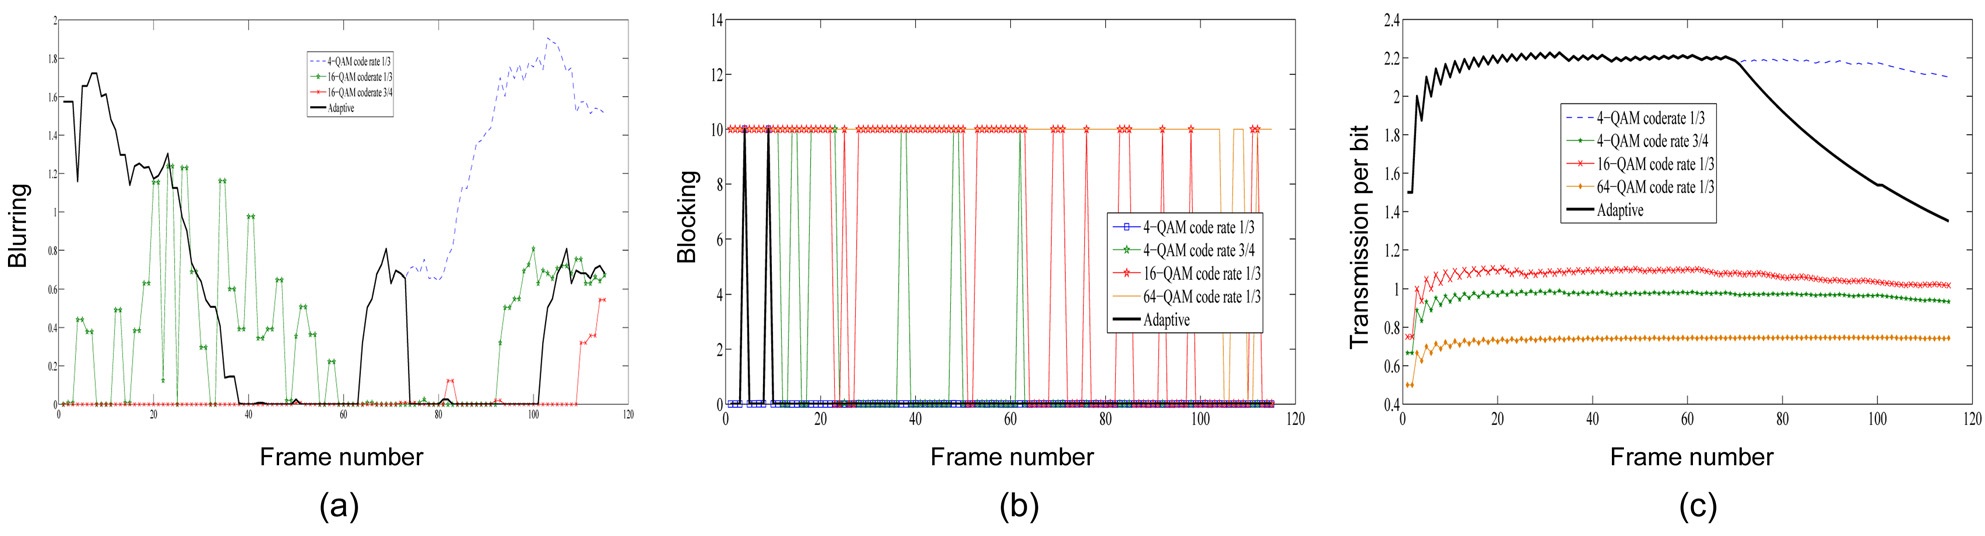 Long-term evolution (LTE) system end-end performance evaluation for changing network profile: (a) blurring measurements, (b) blocking measurements, and (c) average transmissions per bit (cumulative). The channel conditions are varying from poor (0 dB) to good (25 dB) as we move from left to right.